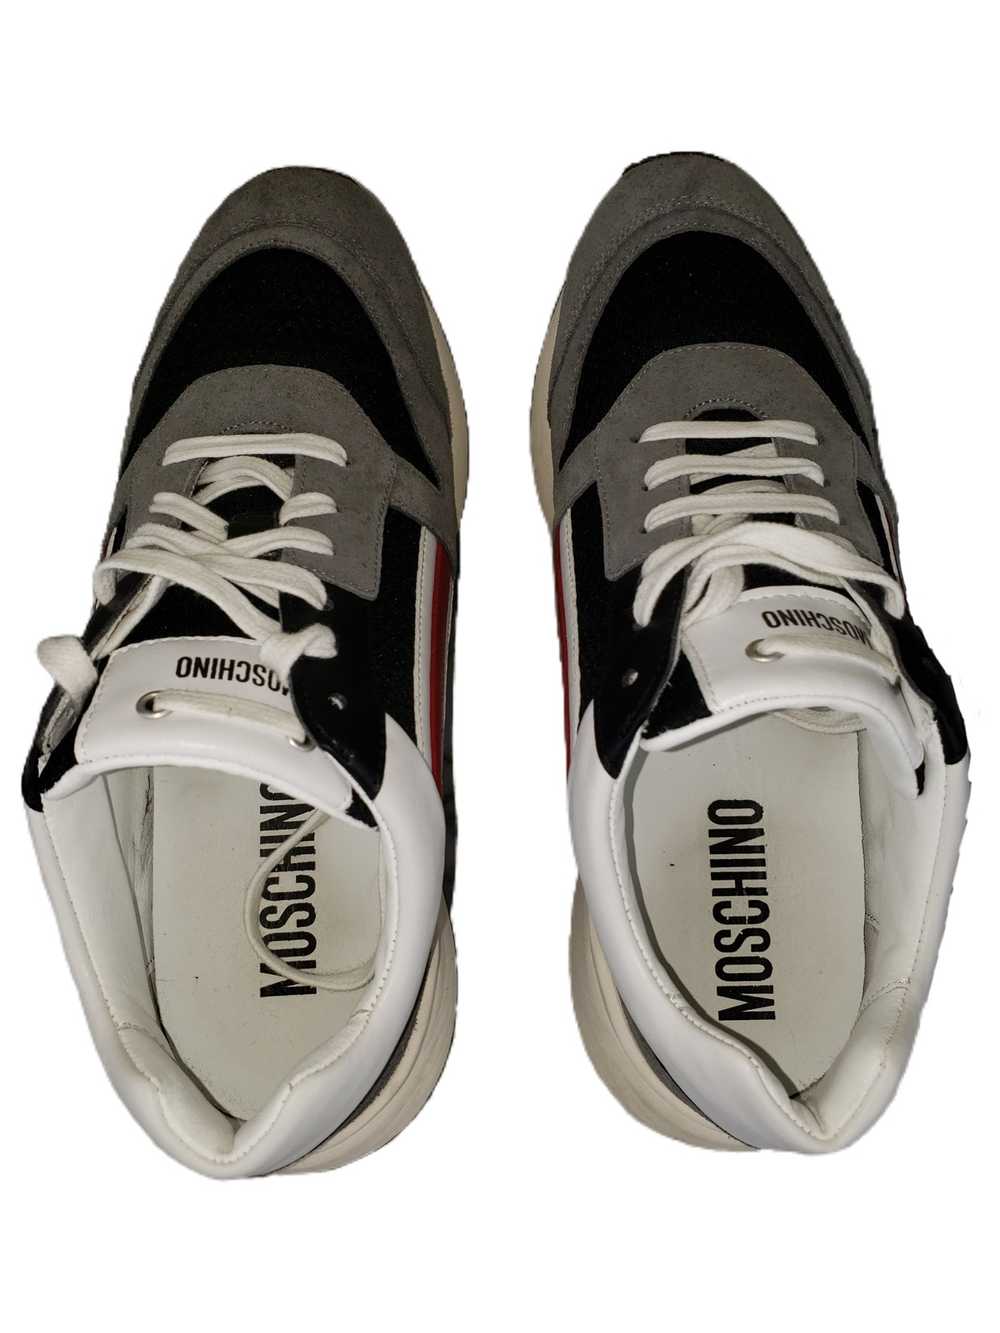 Moschino Moschino Suede Sneakers - image 4